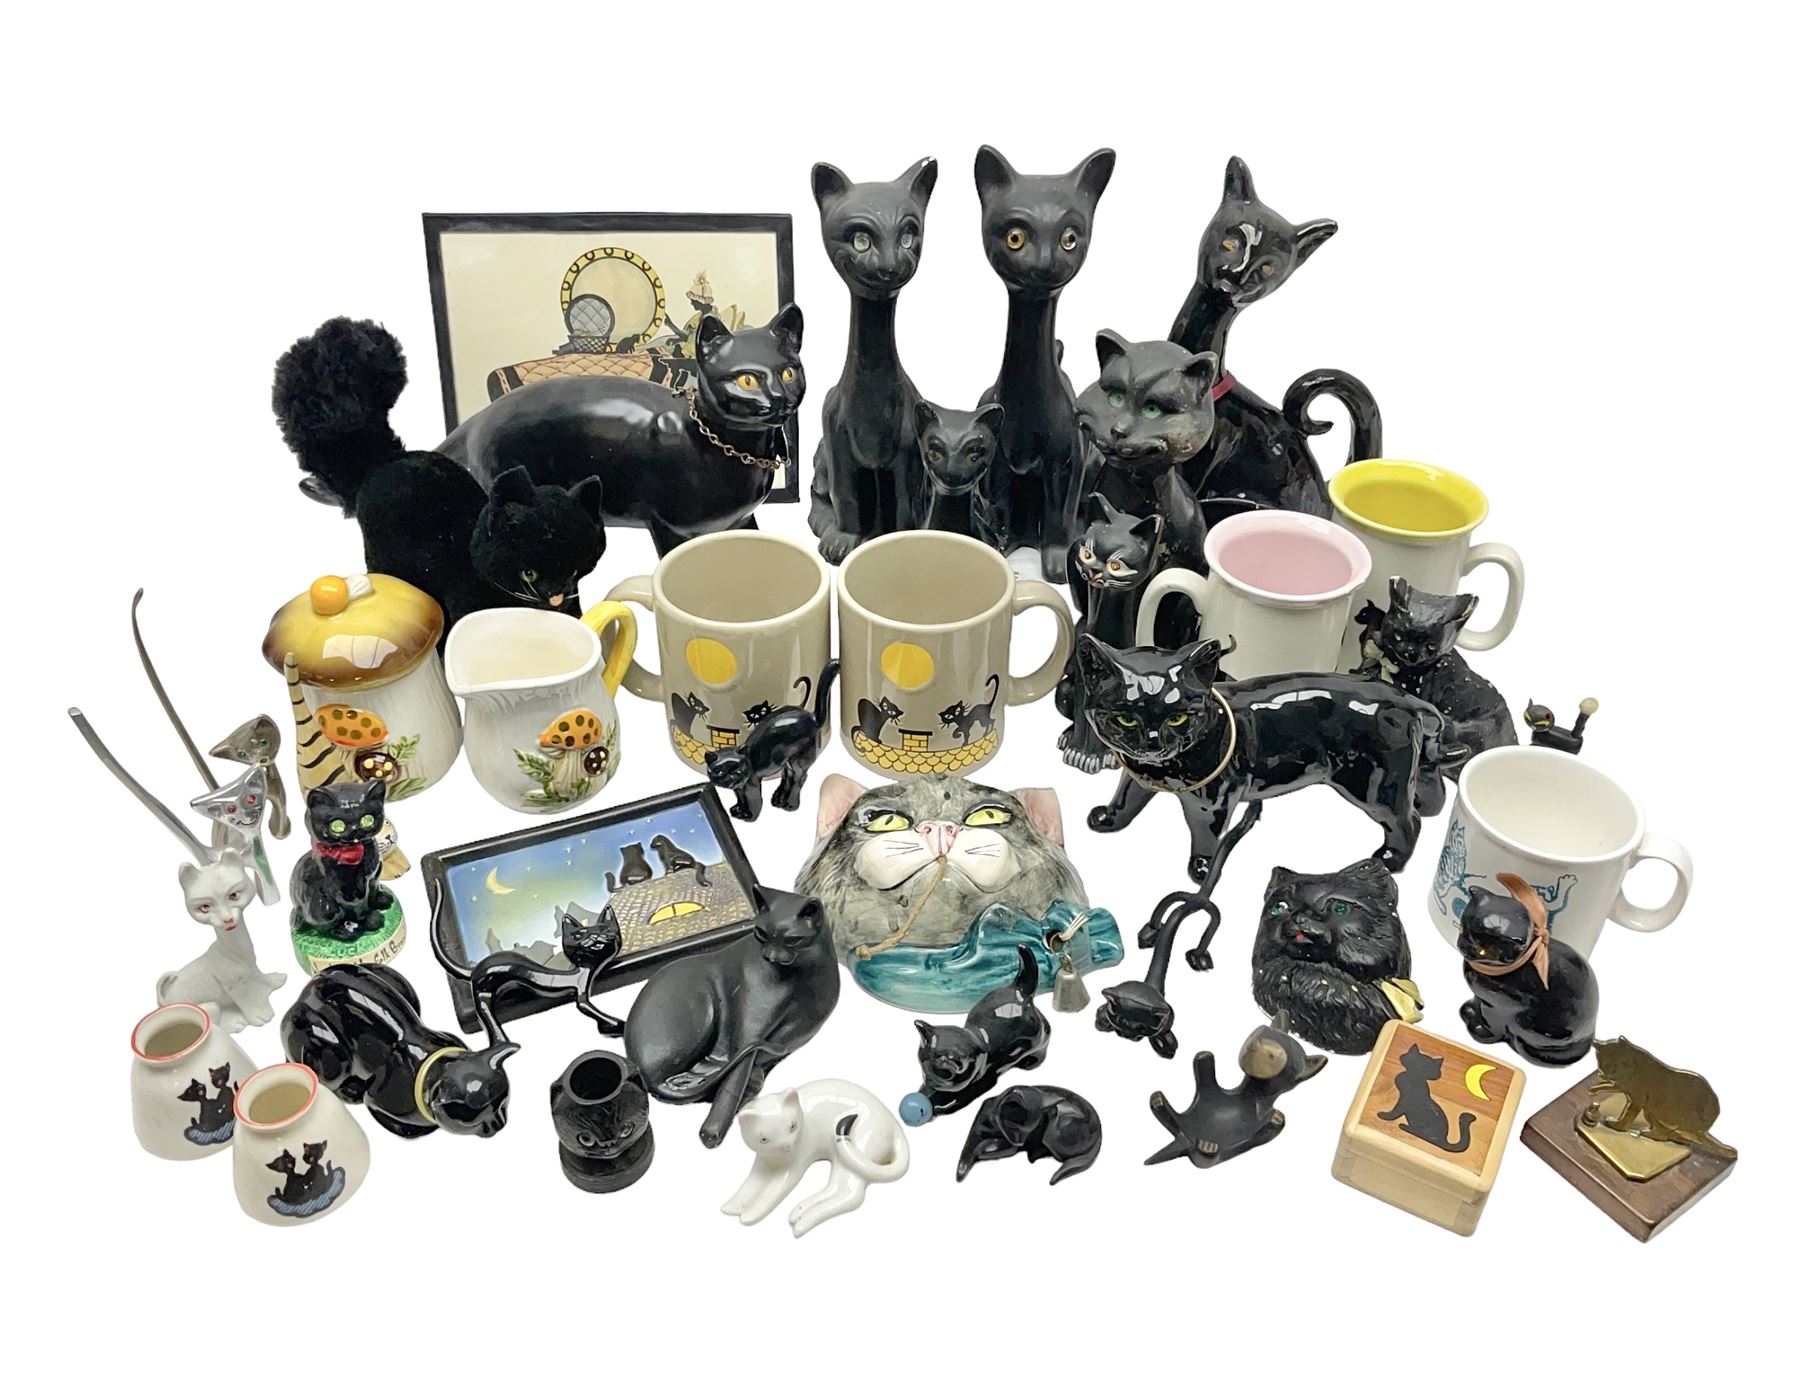 Collectables including figures